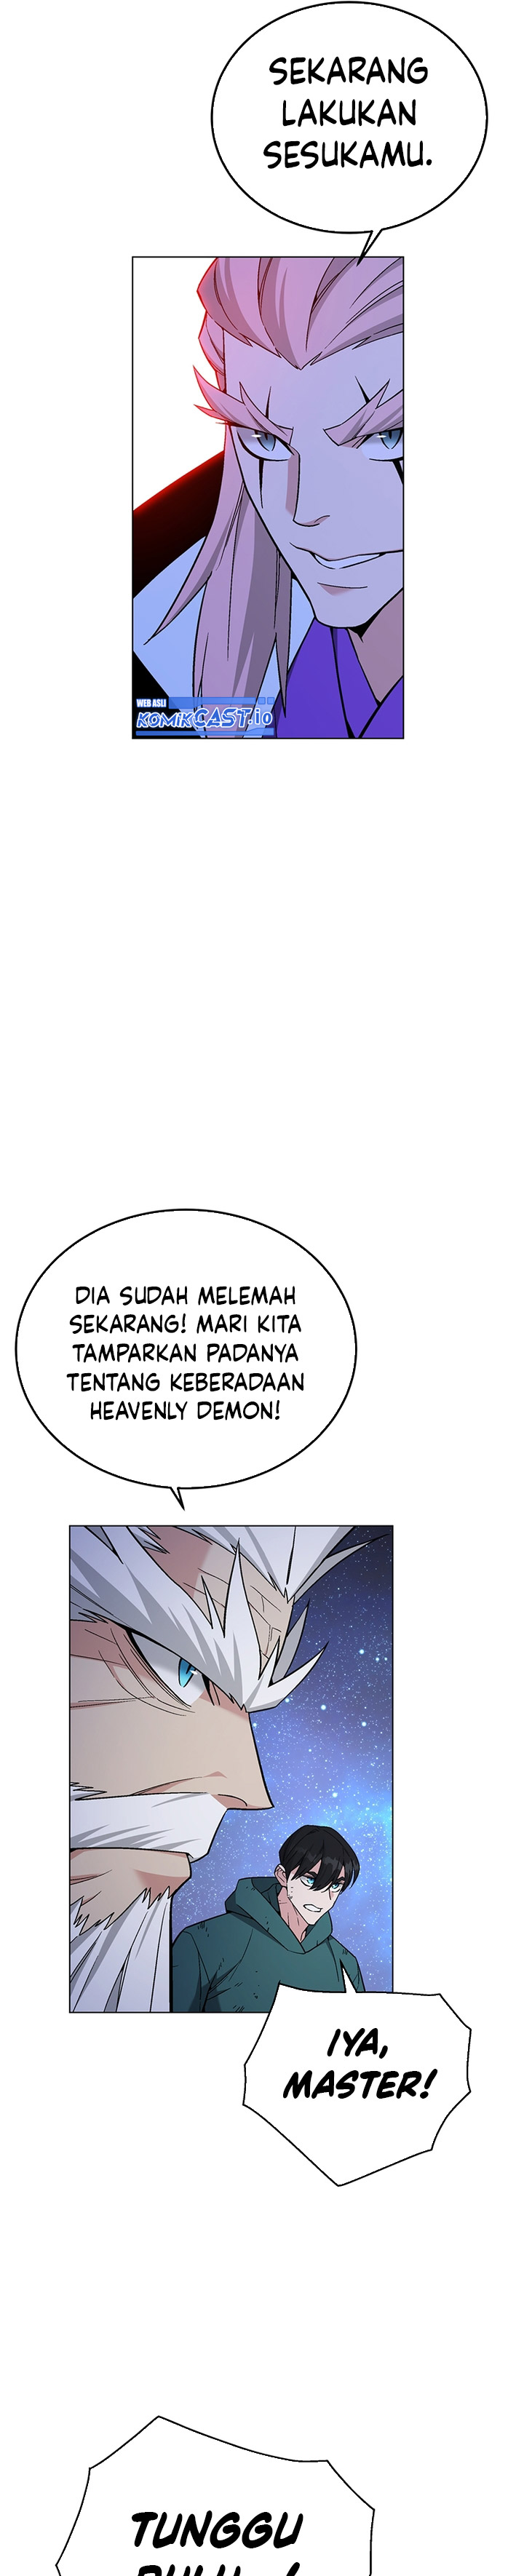 Heavenly Demon Instructor Chapter 105